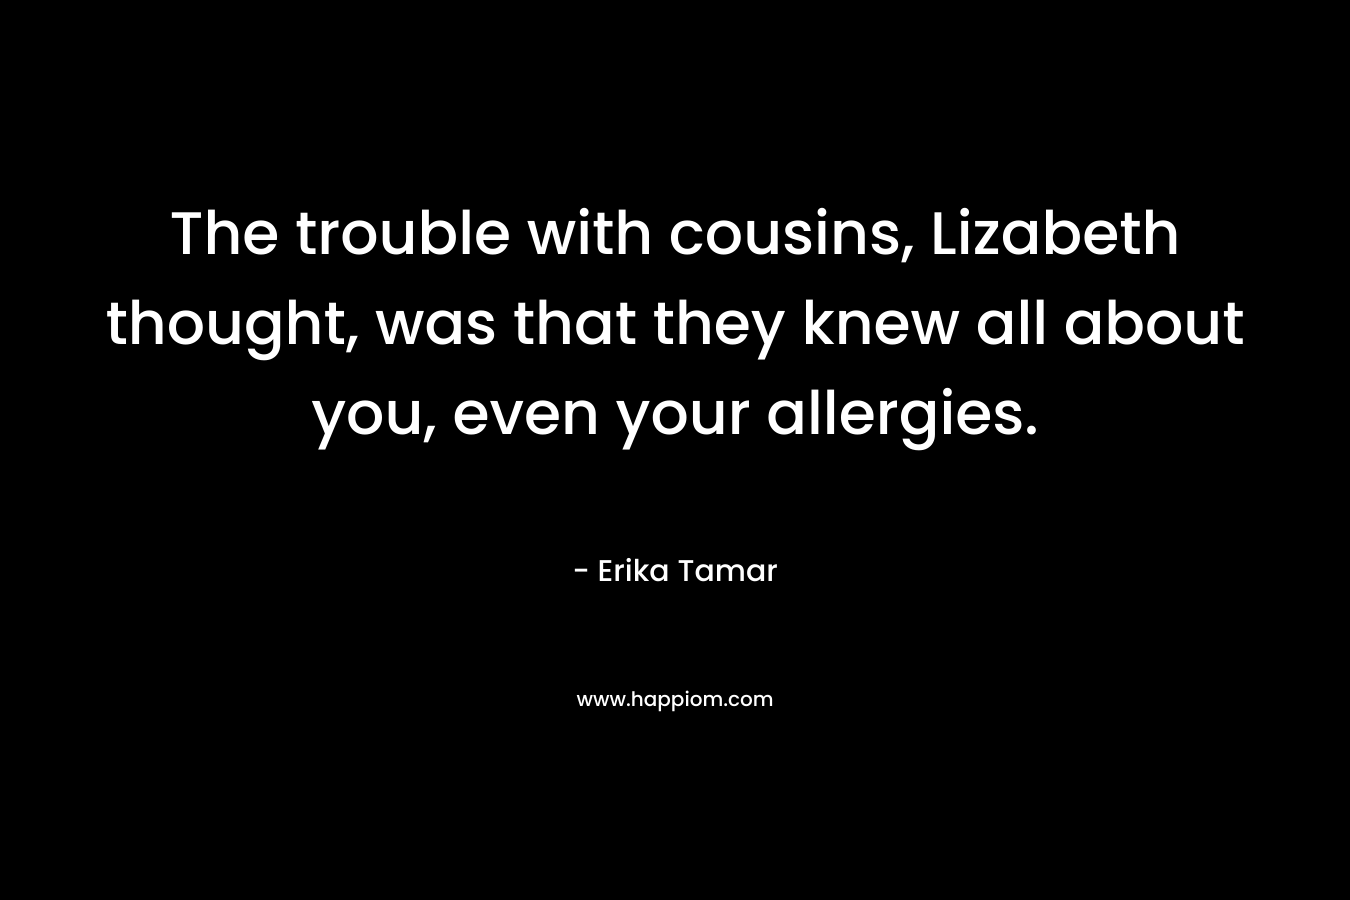 The trouble with cousins, Lizabeth thought, was that they knew all about you, even your allergies. – Erika Tamar